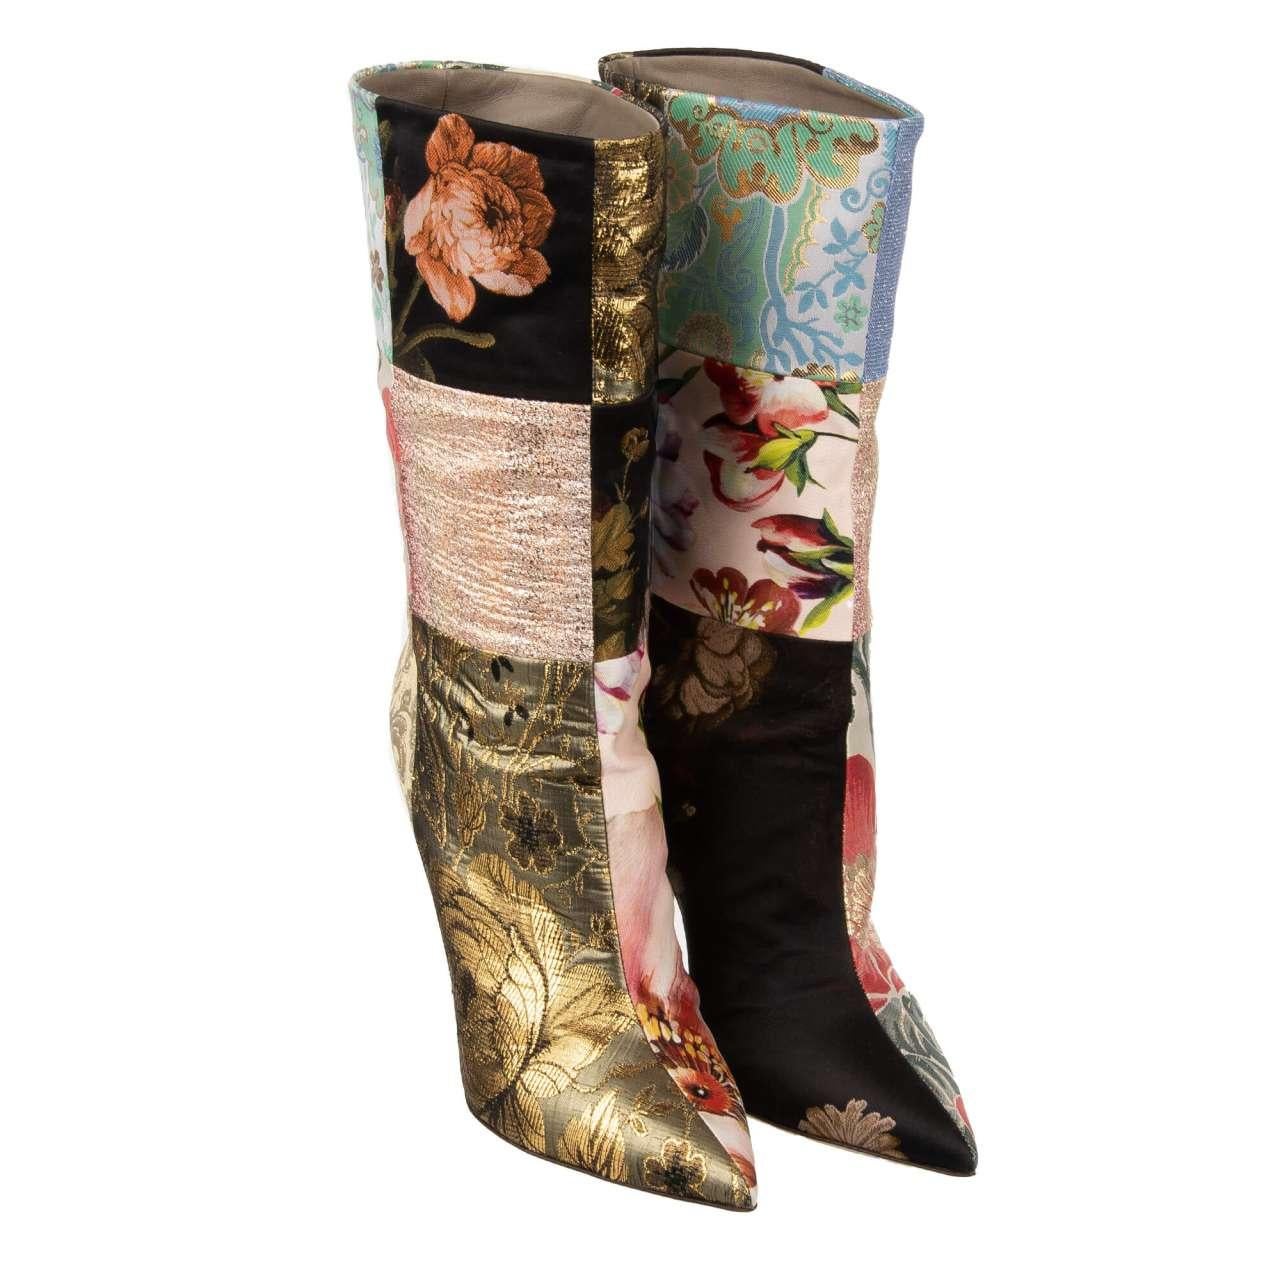 Dolce & Gabbana Flower Brocade Patchwork Boots CARDINALE Gold Pink 40.5 10.5 For Sale 3